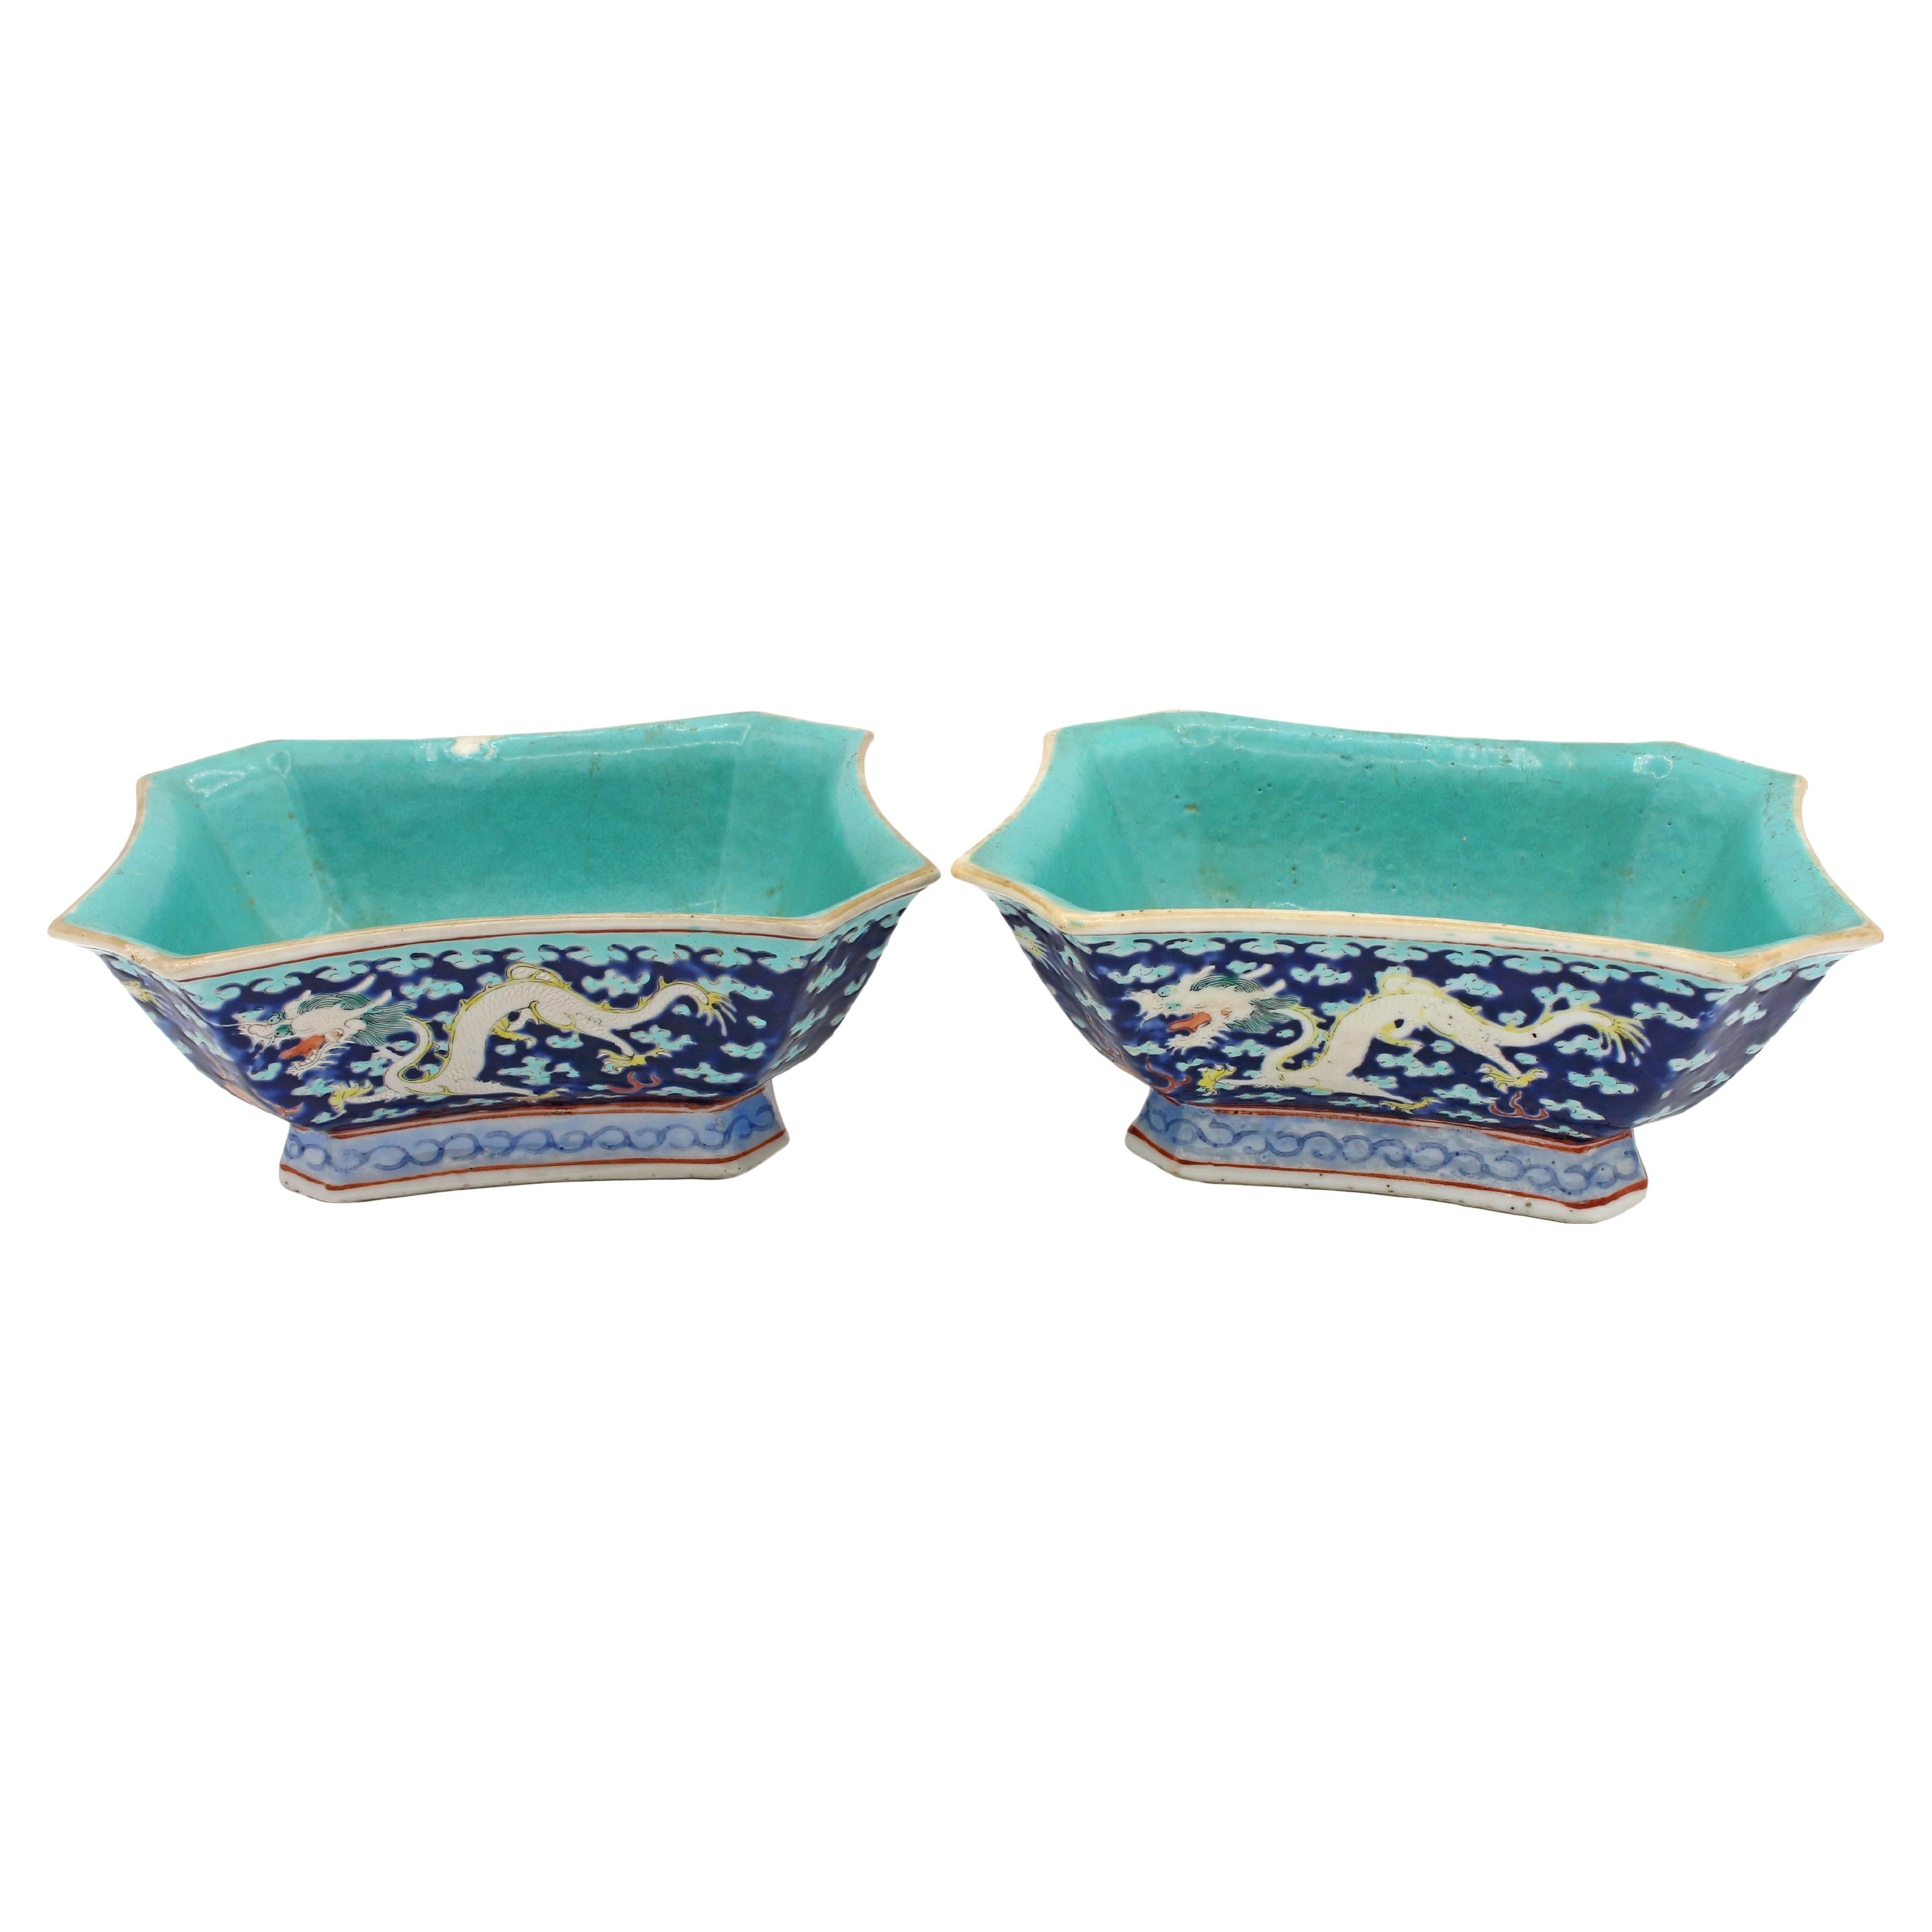 Late 19th-Early 20th Century Pair of Chinese Stacking Bowls For Sale